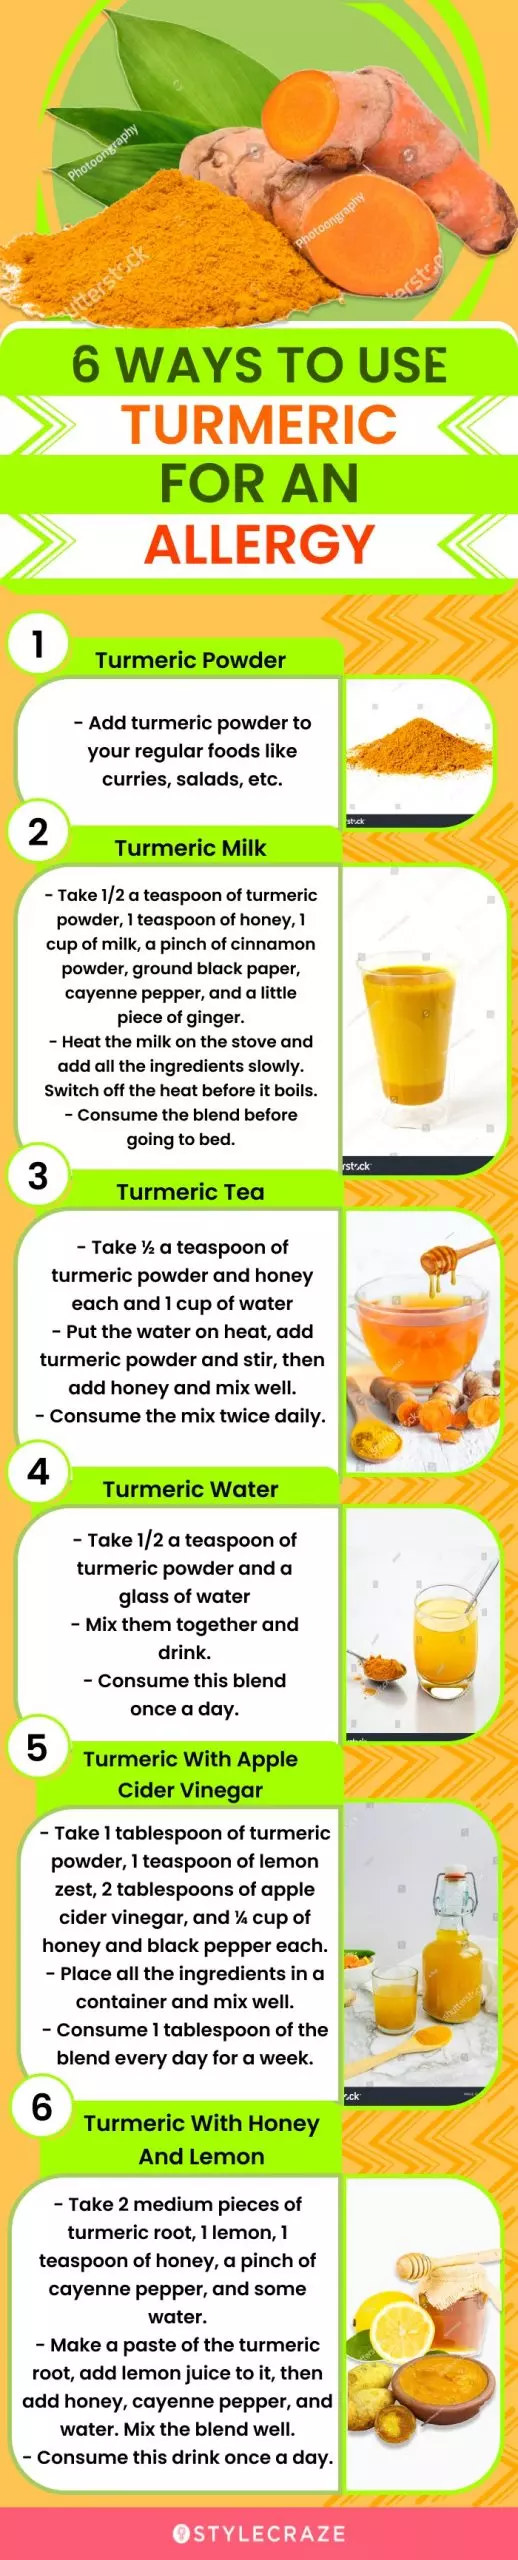 6 way to use turmeric for an allergy (infographic)